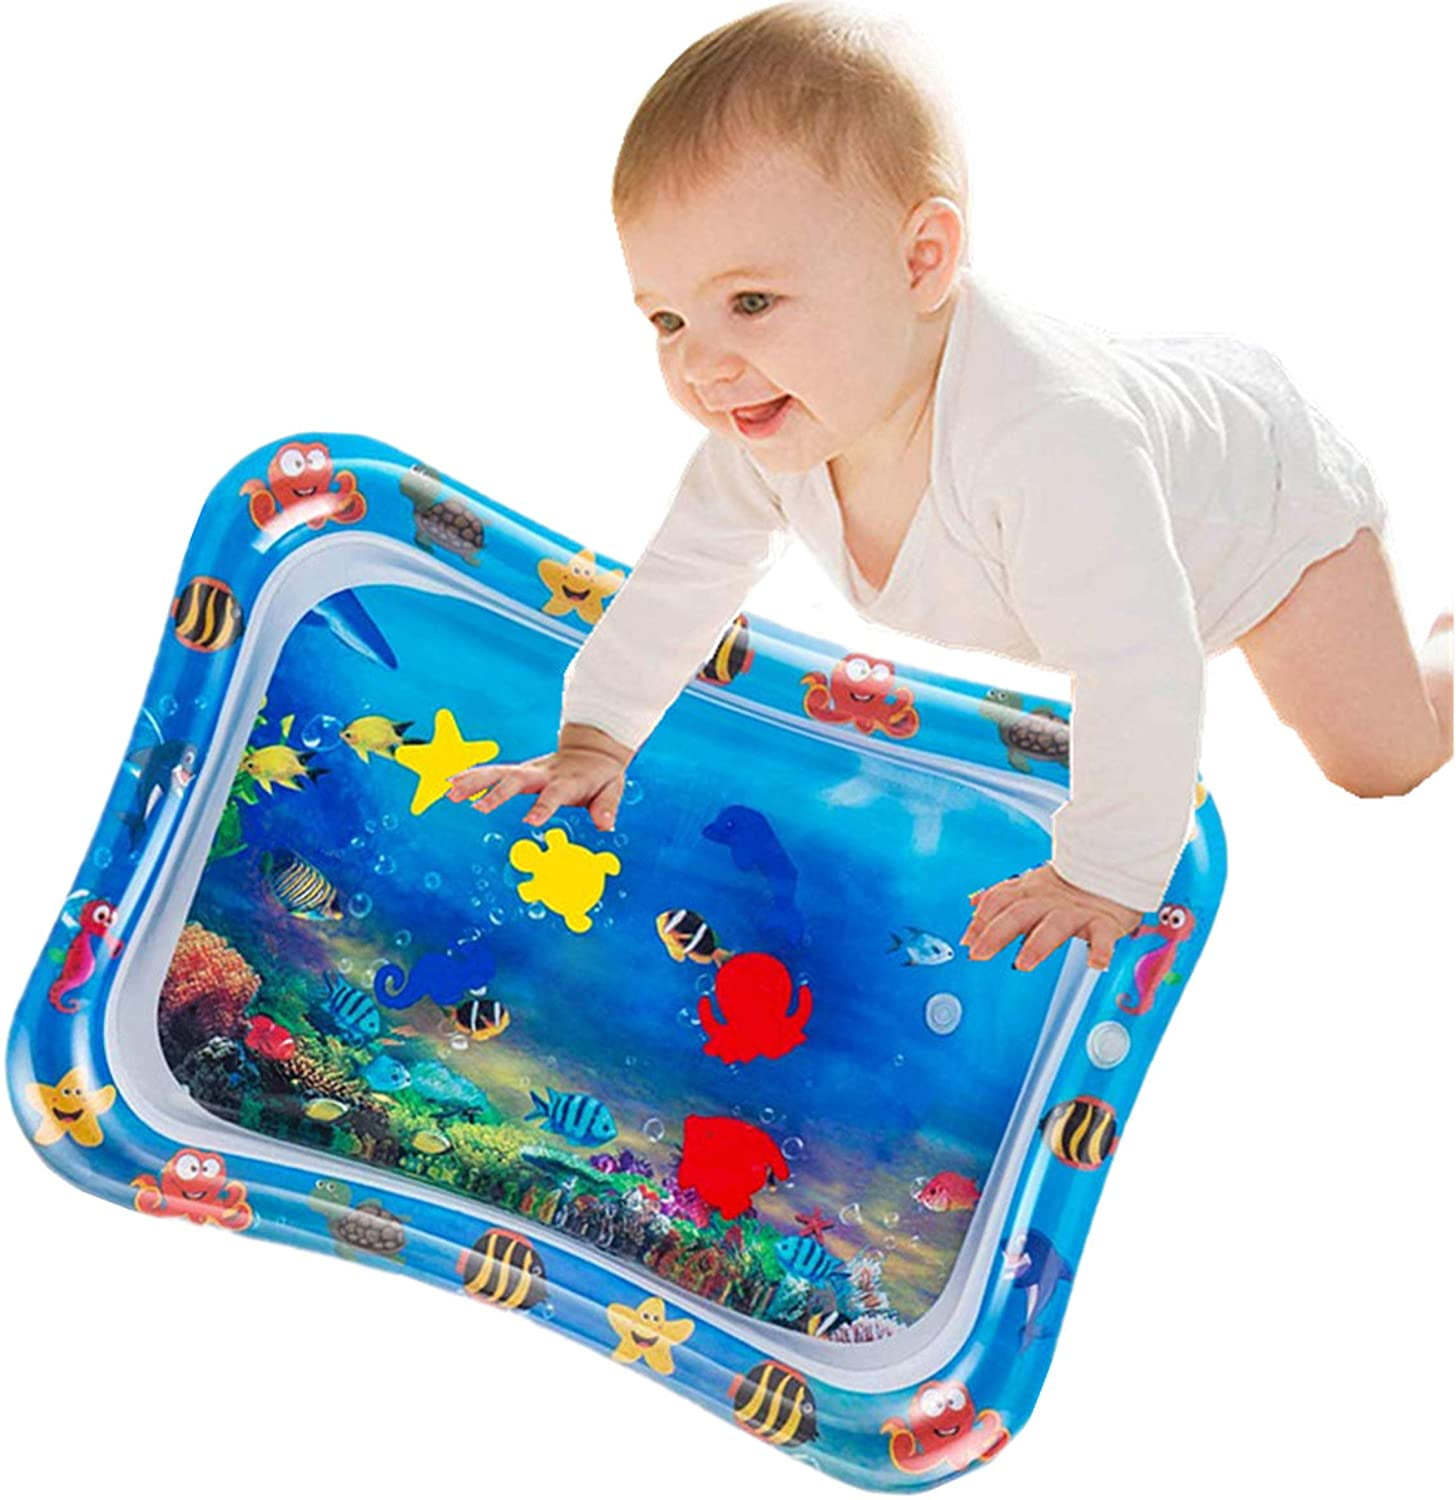 Tummy Time Water Play Mat,Tummy Time Mat Suitable for 3-6-9 Months Old Newborn Boys and Girls,Tummy Time Mats for Babies,Baby Water Play Mat,Fun Game Activity Center Toys Strength Your Babys Muscles